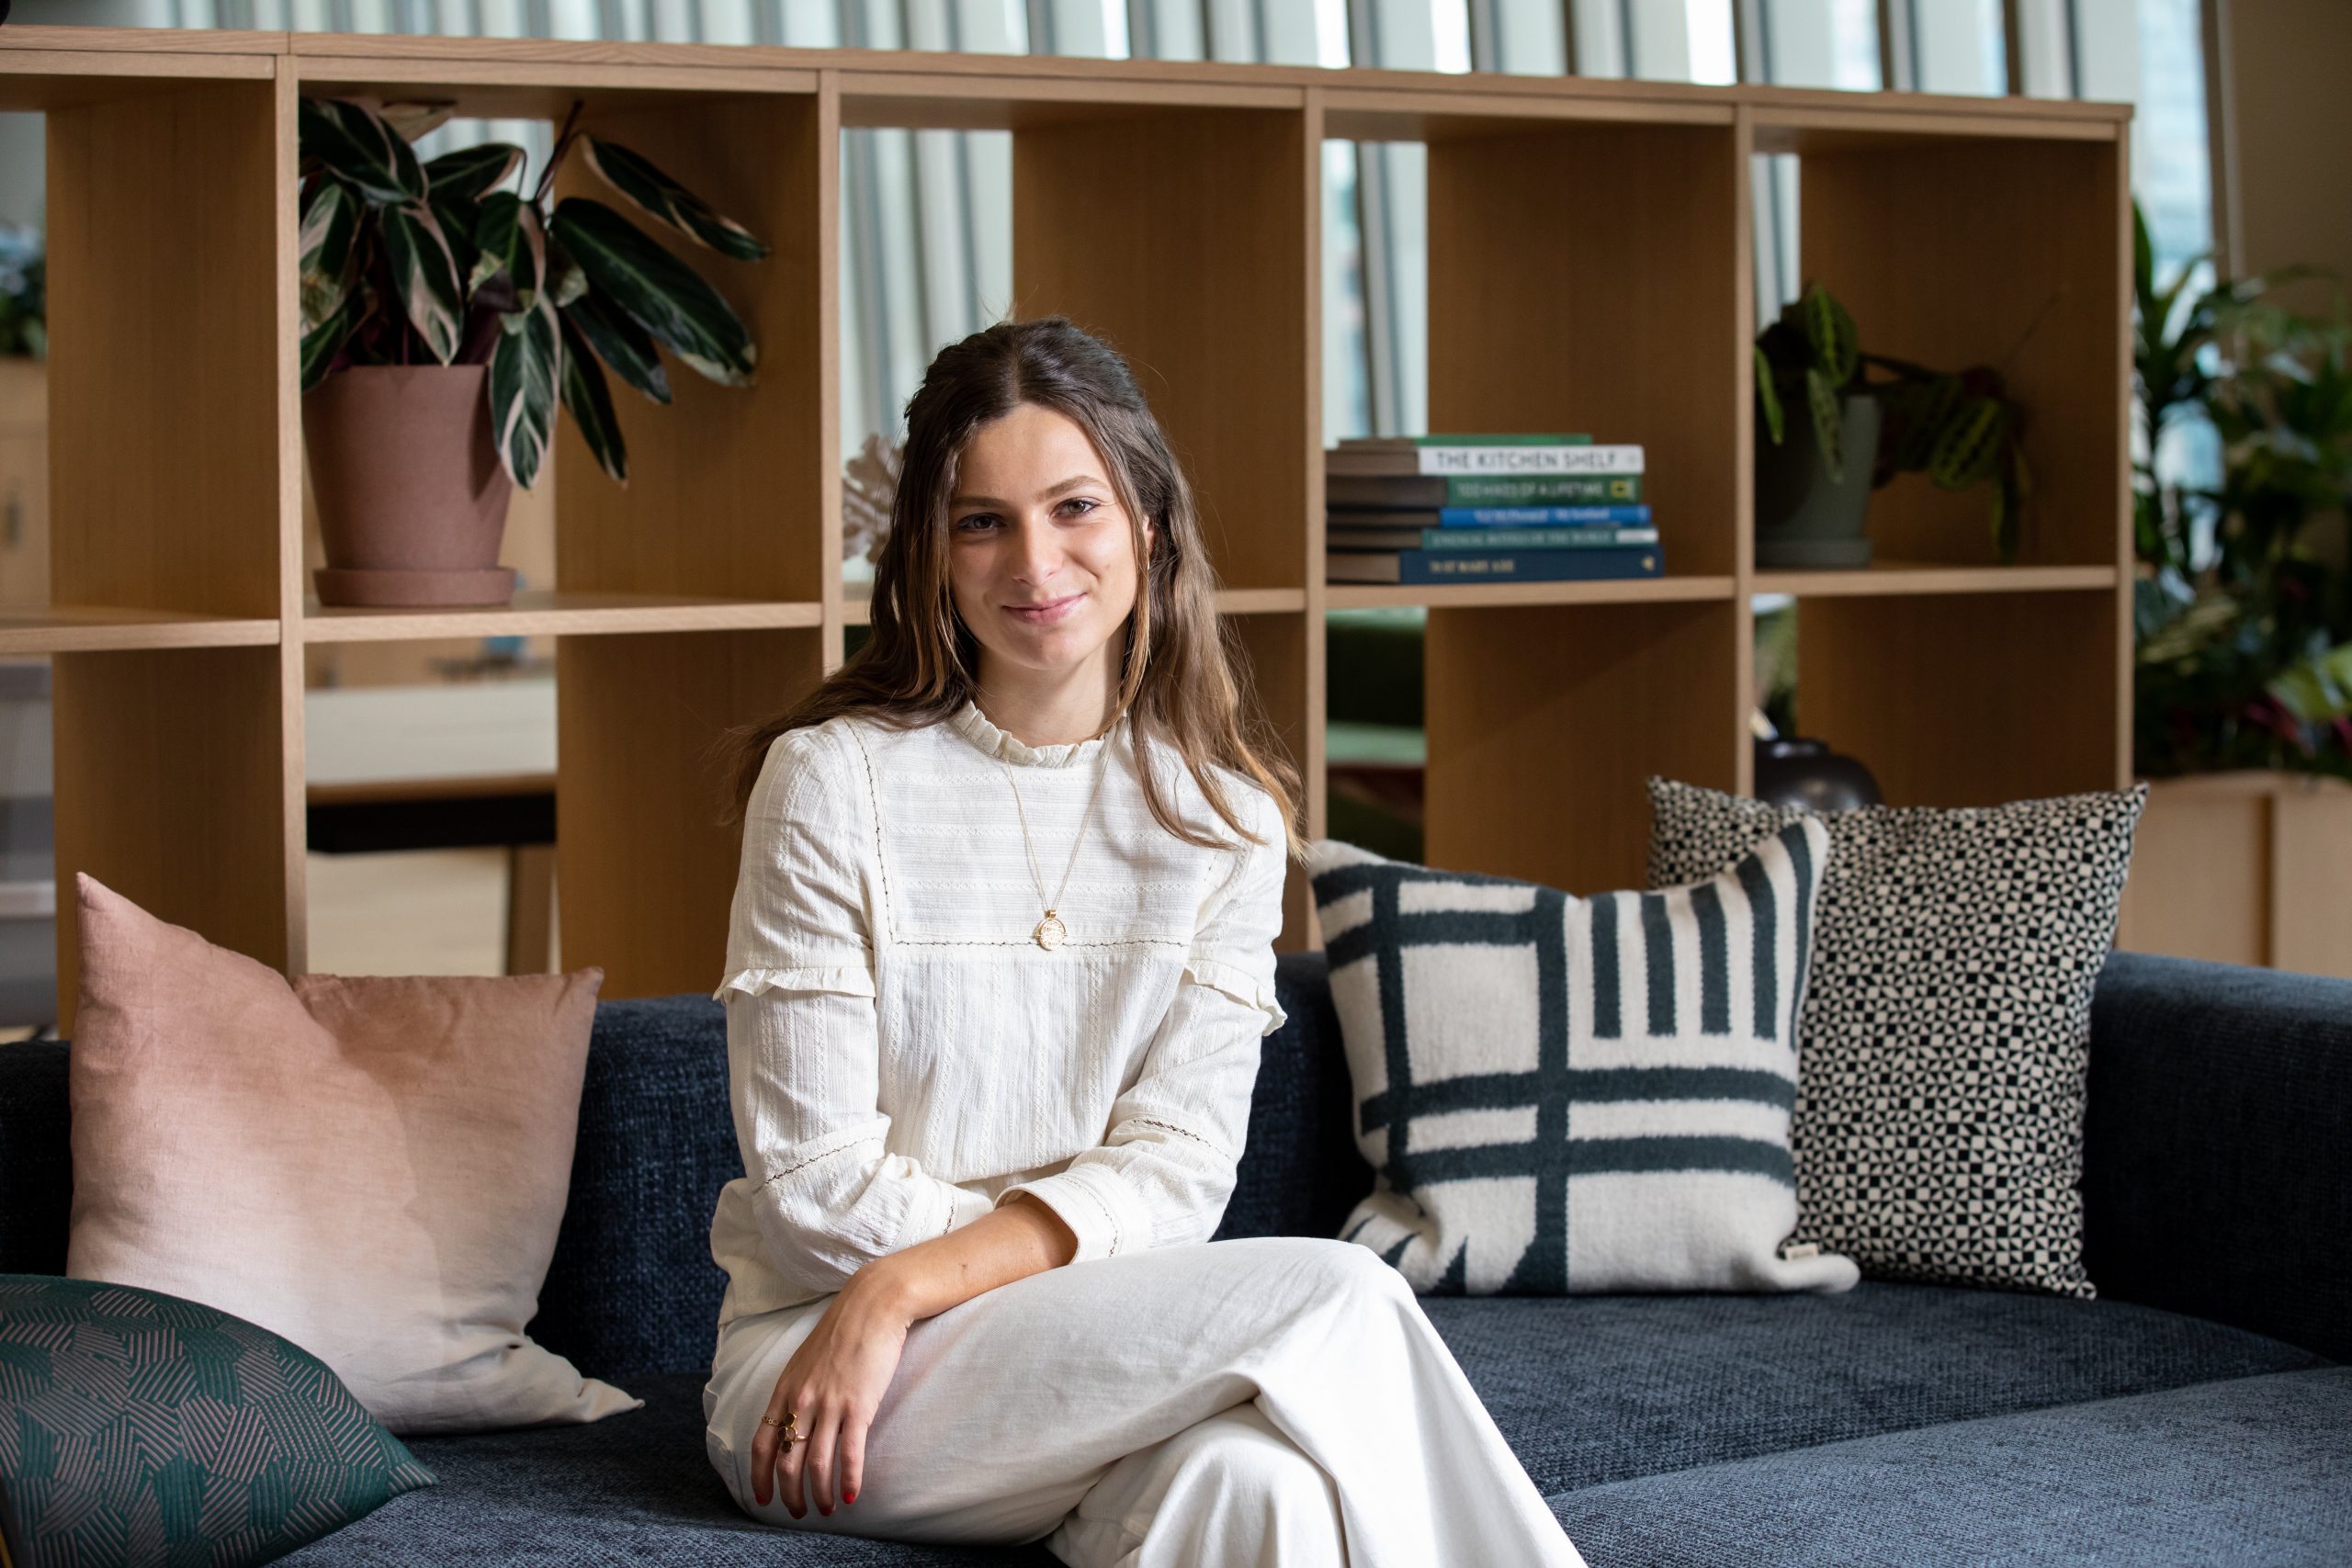 Hannah Chappatte Hybr scaled Record £3.24m ($4.41m) Seed Round Funding for Hybr – the curated platform for first-time renters